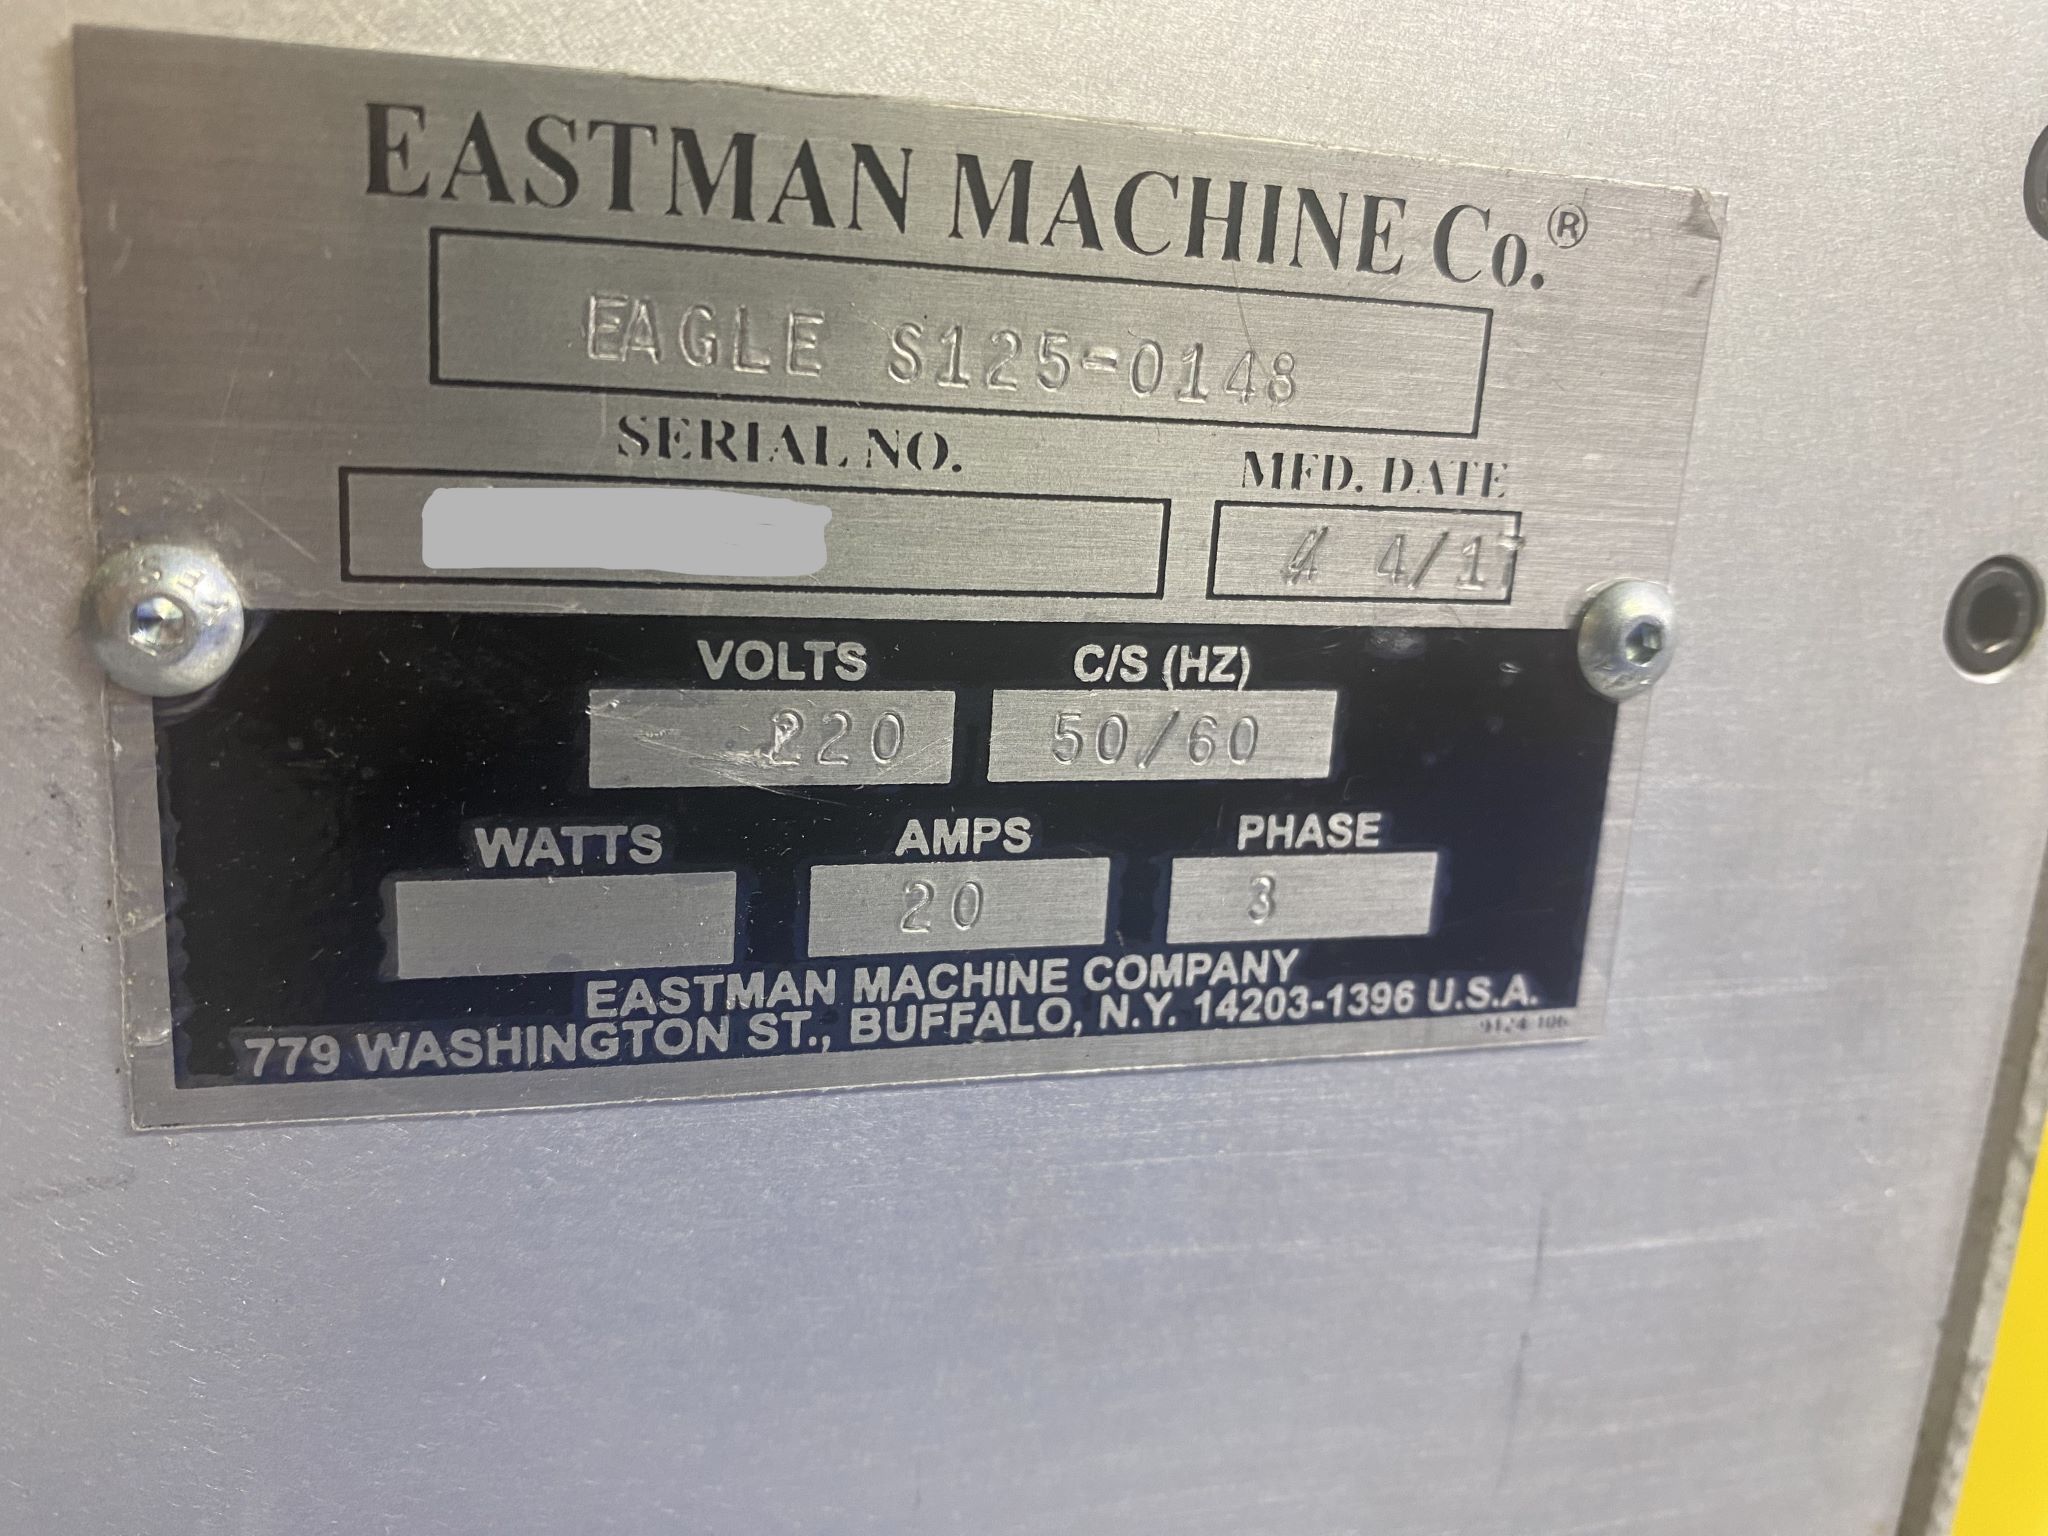 Eastman Eagle S125 Automatic Cutting System (Used) Item # UE-030824D